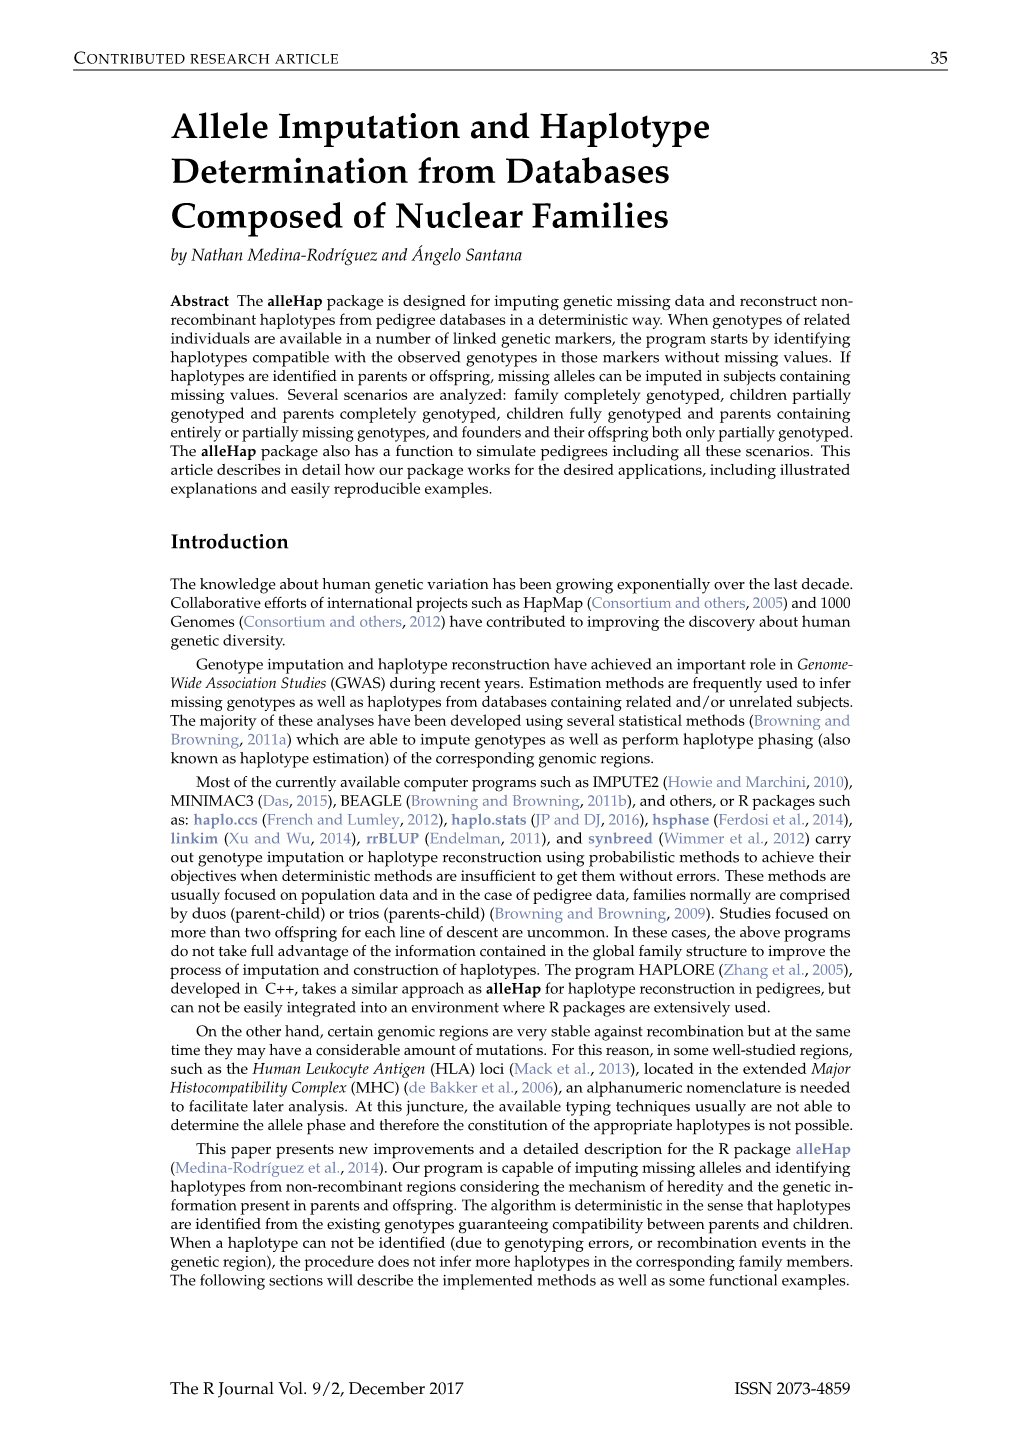 Allele Imputation and Haplotype Determination from Databases Composed of Nuclear Families by Nathan Medina-Rodríguez and Ángelo Santana